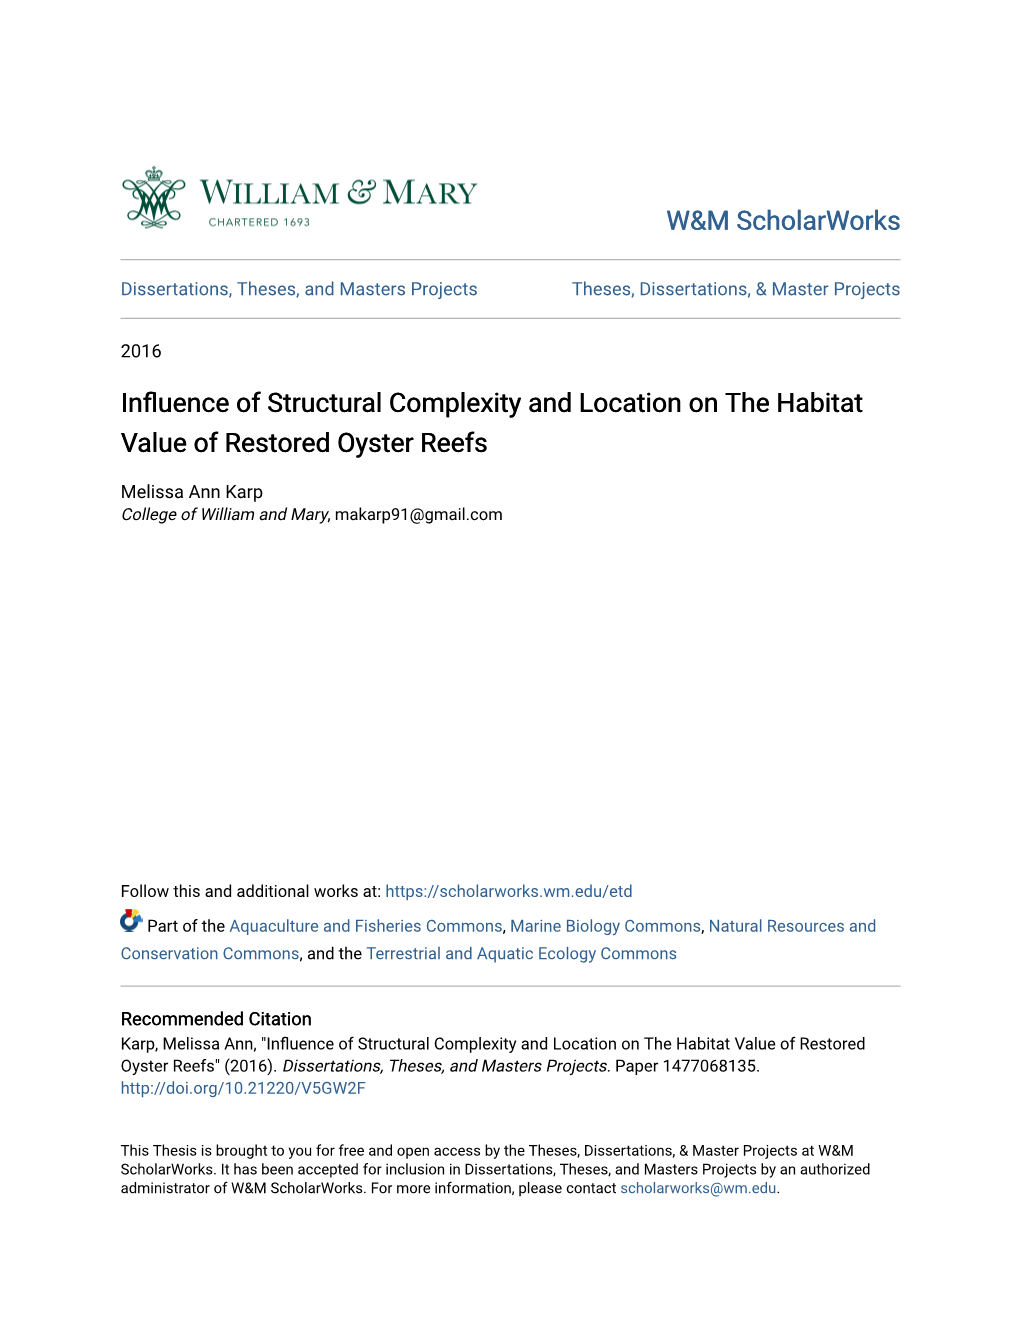 Influence of Structural Complexity and Location on the Habitat Value of Restored Oyster Reefs